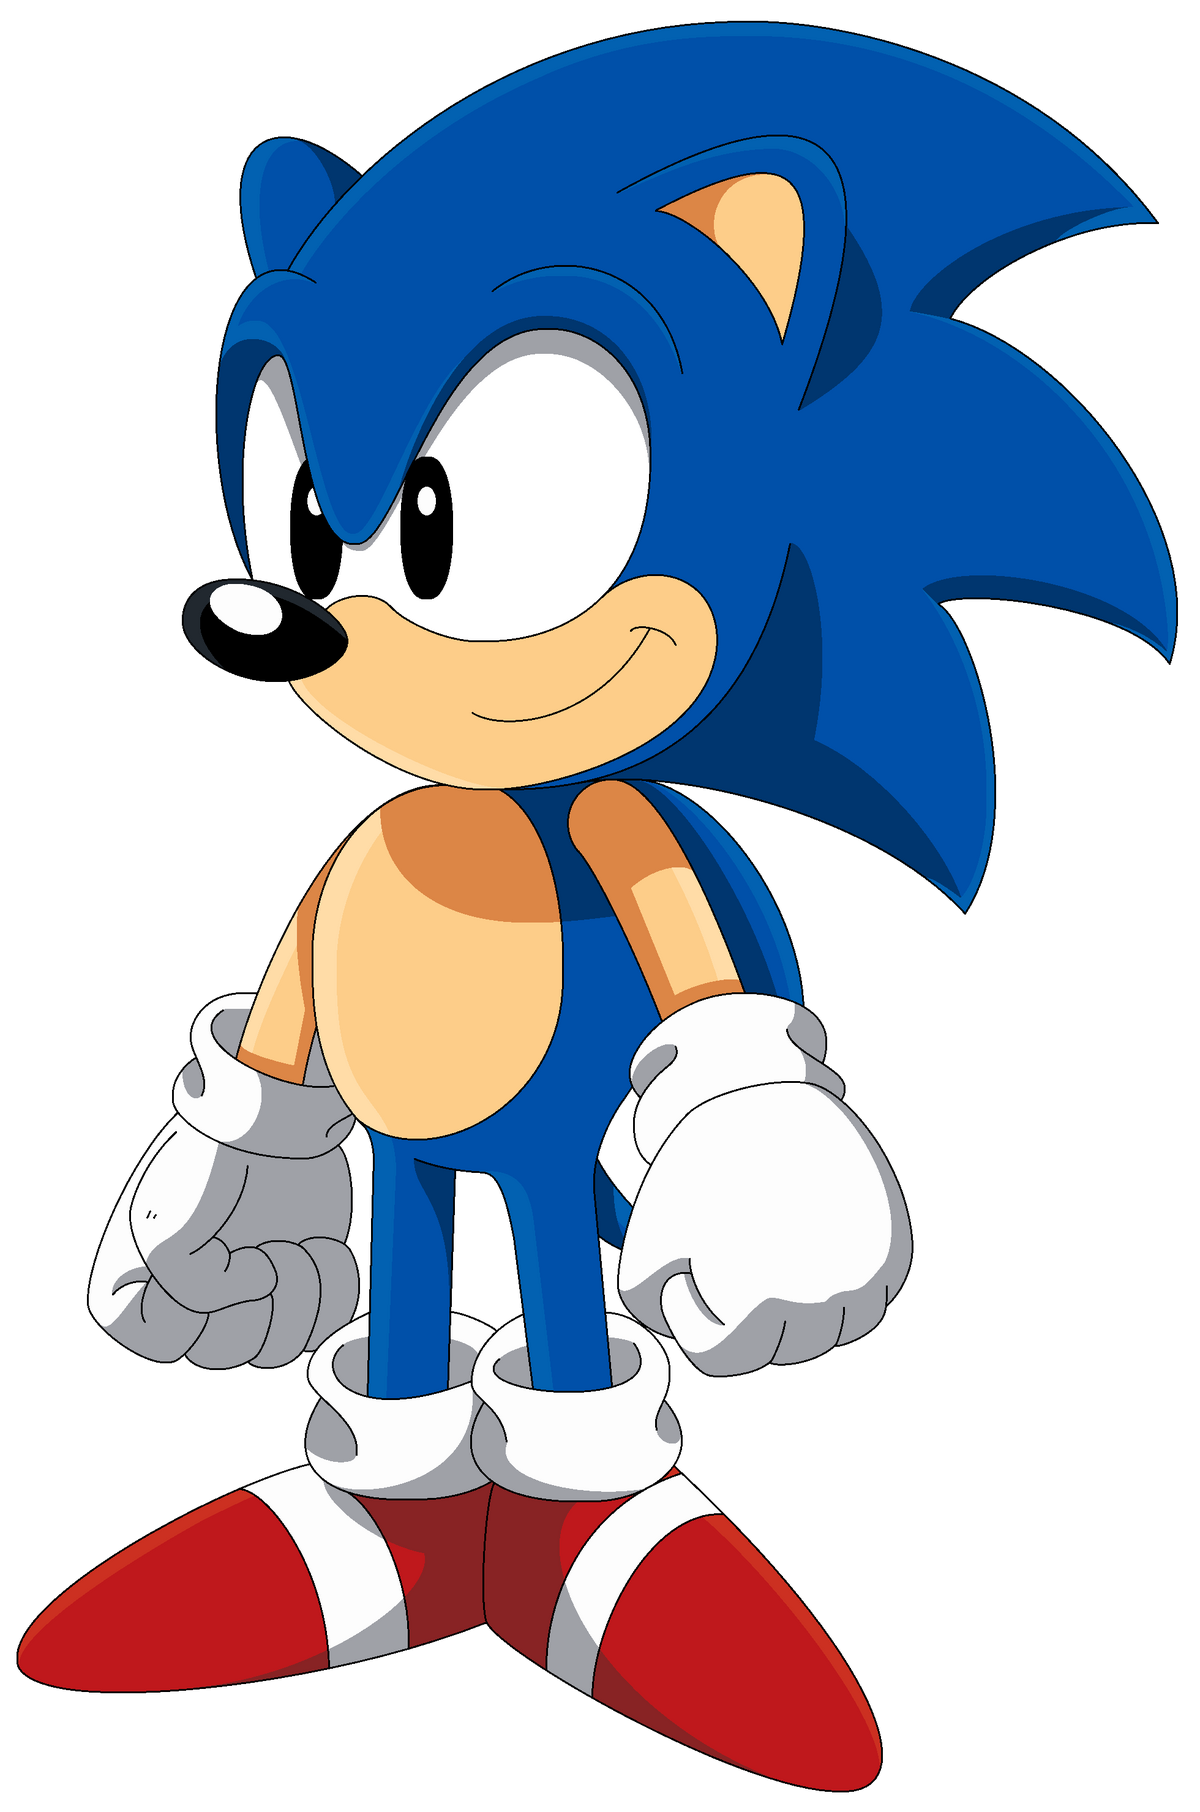 Classic Sonic | Tails and Sonic Pals Wiki | Fandom